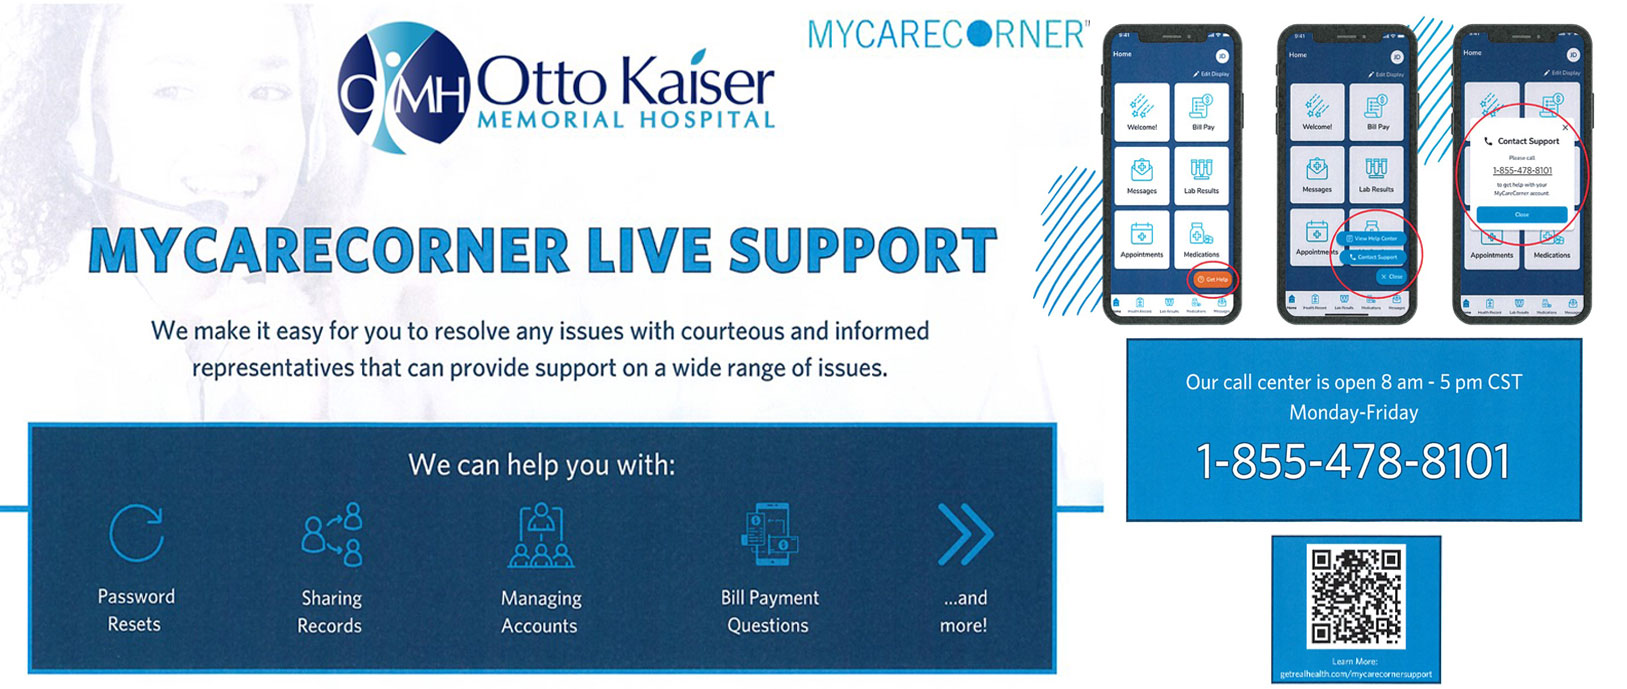 Mycarecorner Live Support

We make it easy for you to resolve any issues with courteous and informed representatives that can provide support on a wide range of issues.